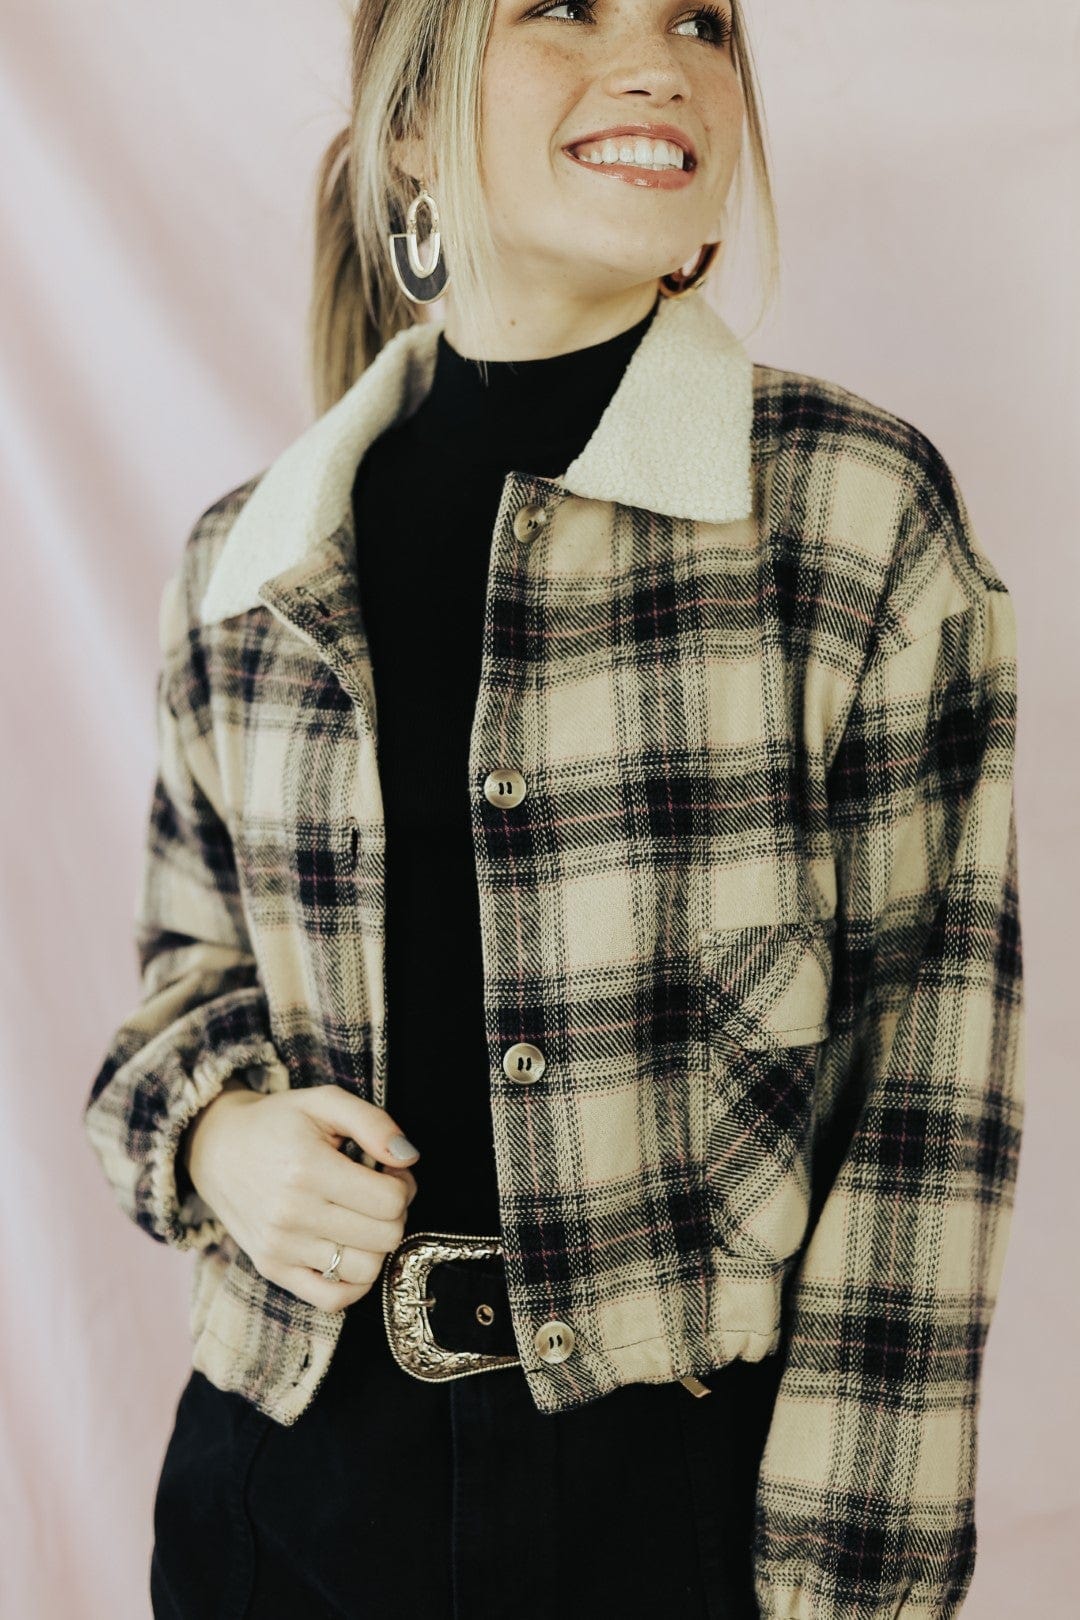 Around The Tree Plaid Jacket - Select Trends Boutique